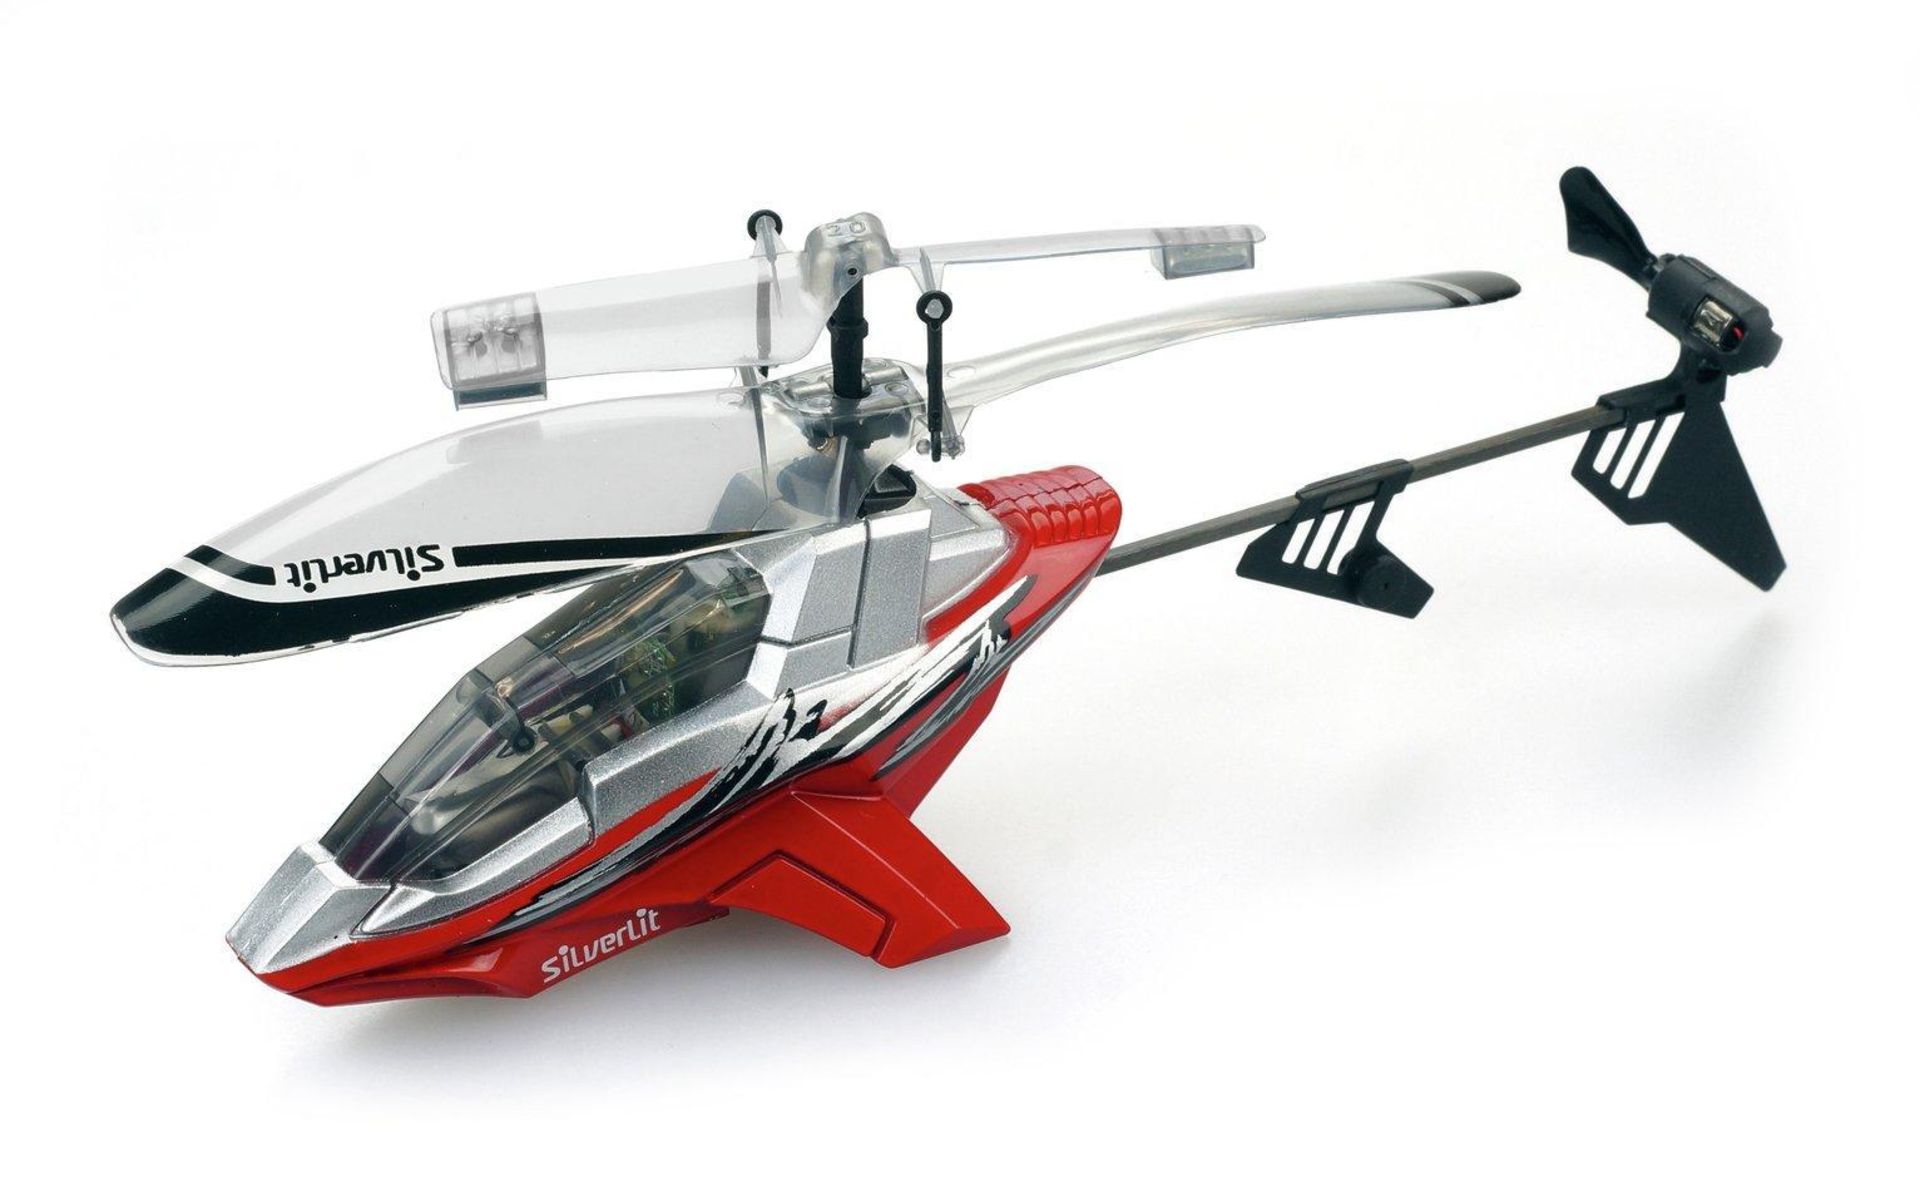 Infrared Air Striker Radio Controlled Helicopter, £18.00 RRP